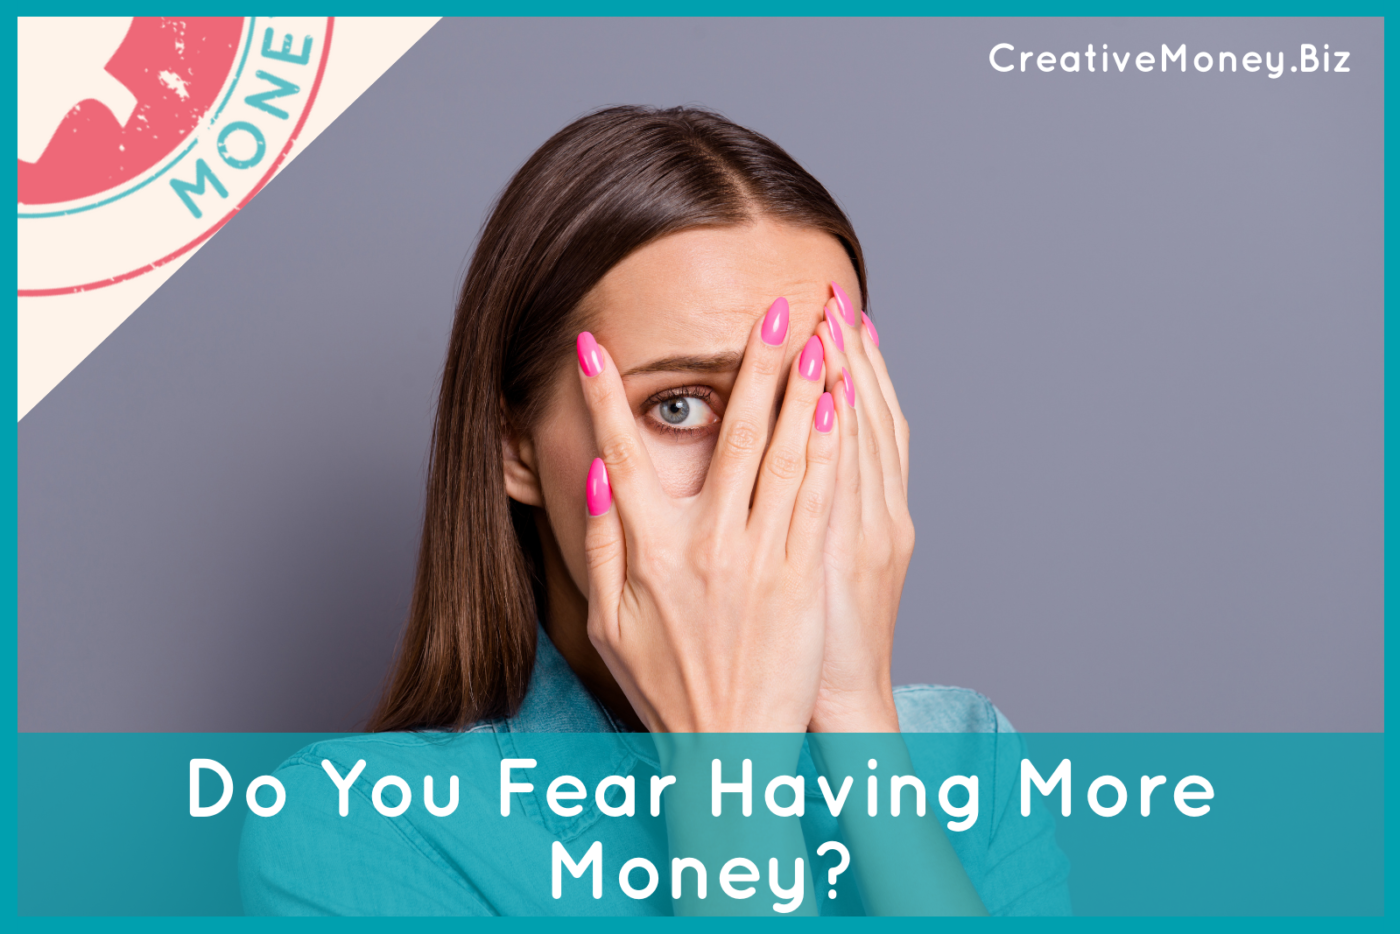 Creative Money Blog Complimentary Financial Insight From Mindy Crary 8048